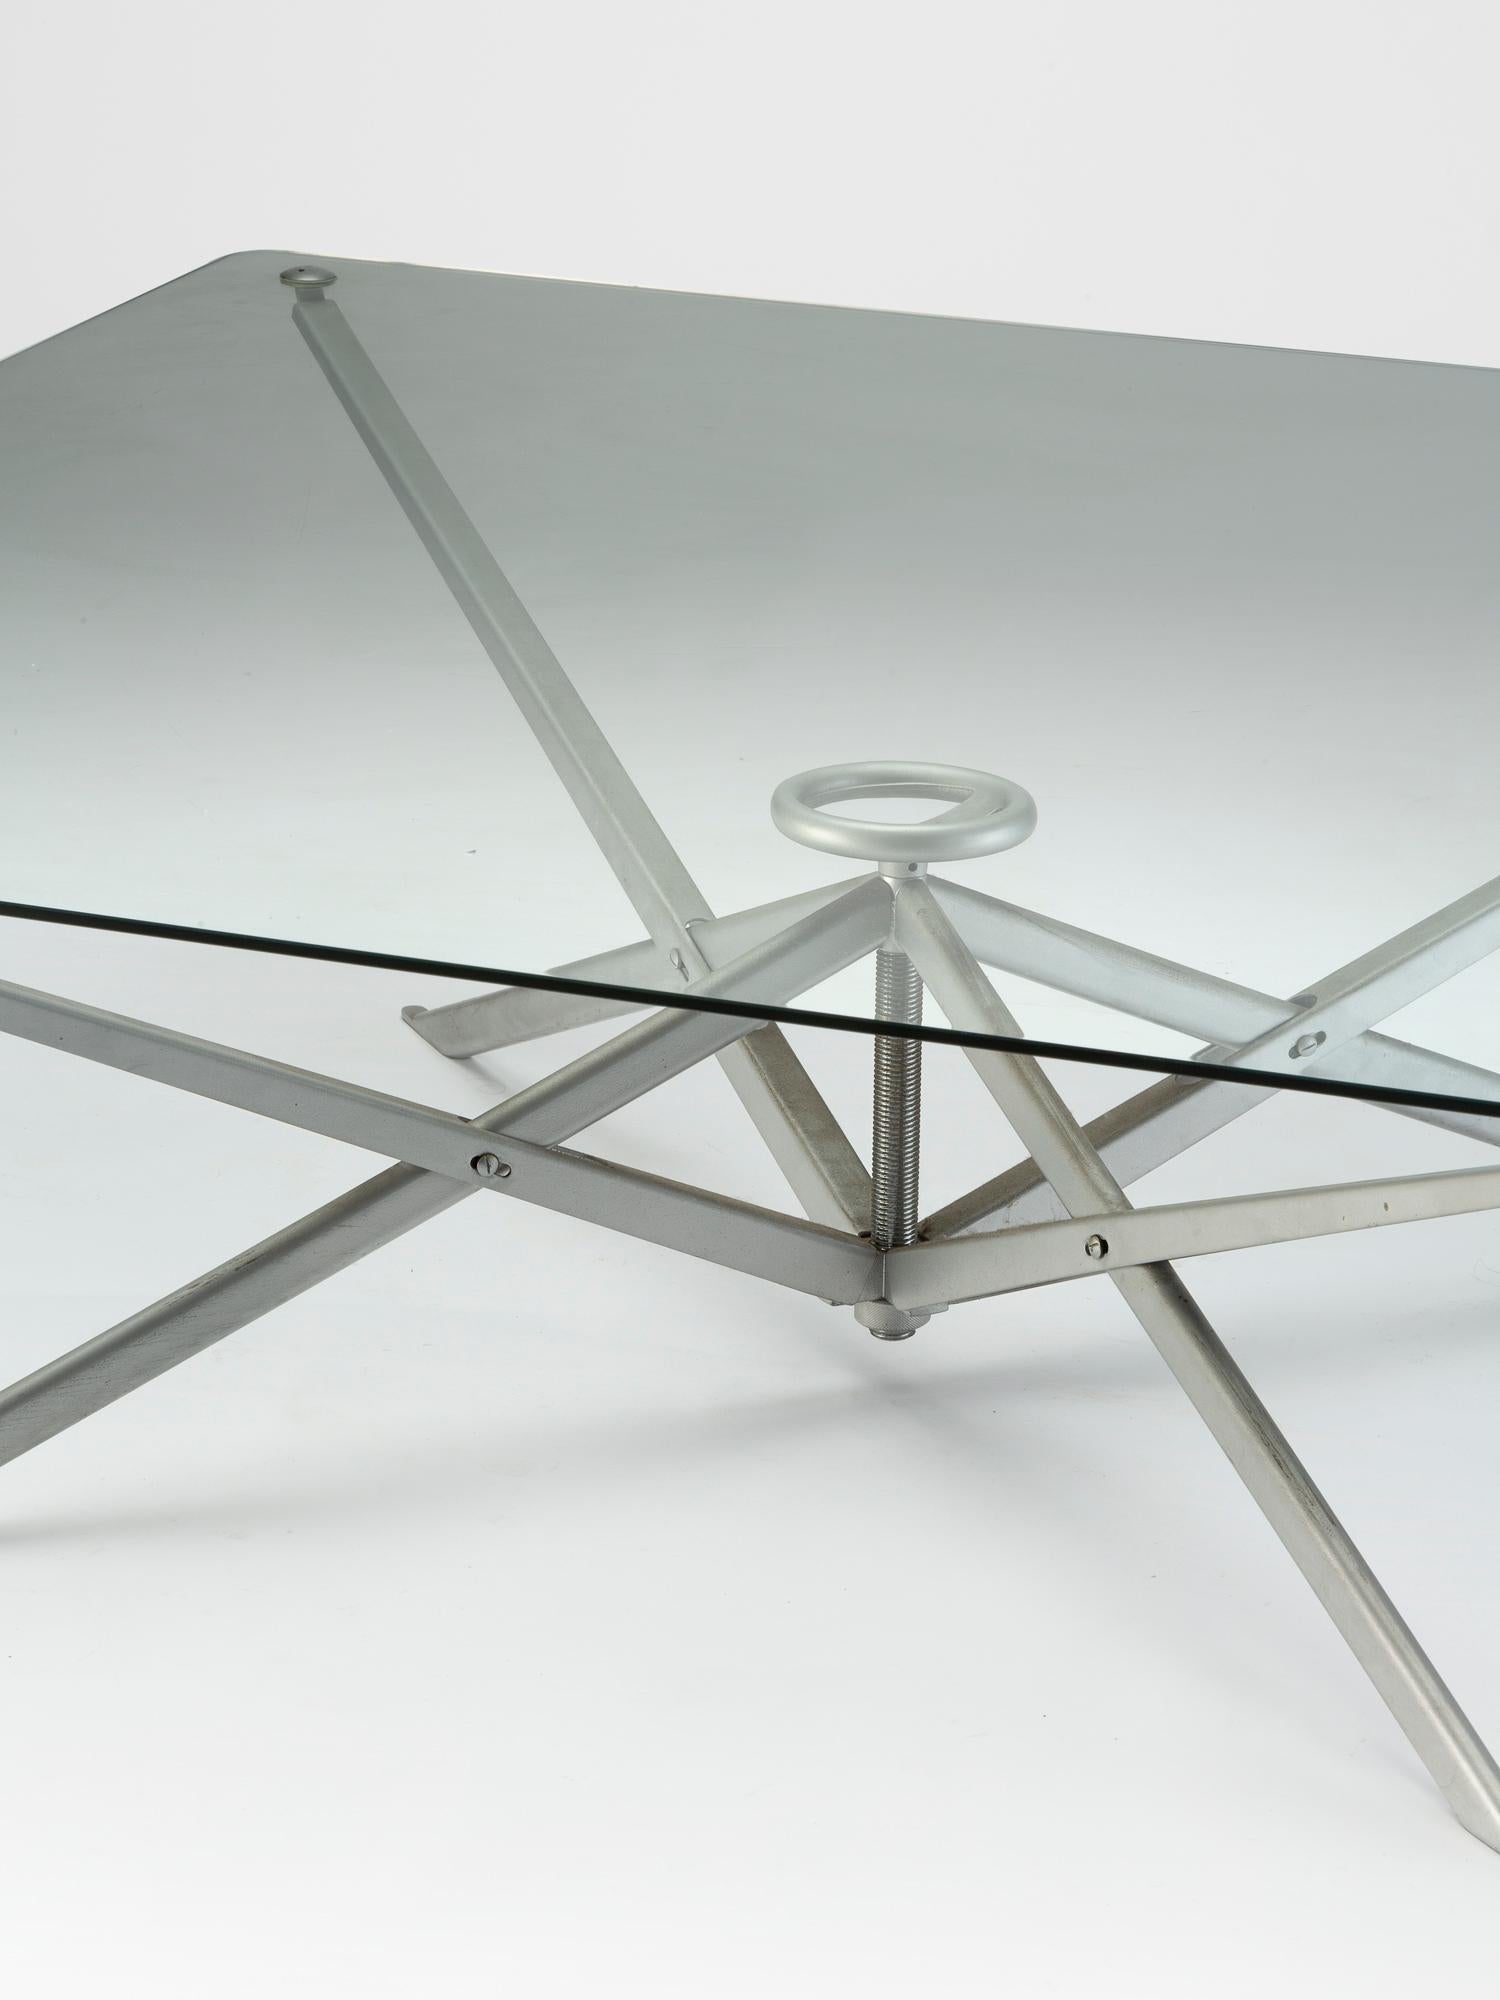 Rare table Hero's Muscles design by Paolo Pallucco and Mireille Rivier in 1989, only a few were produced.
The table is made of a metal structure with a temperate glass tabletop.
Beautiful original condition!!